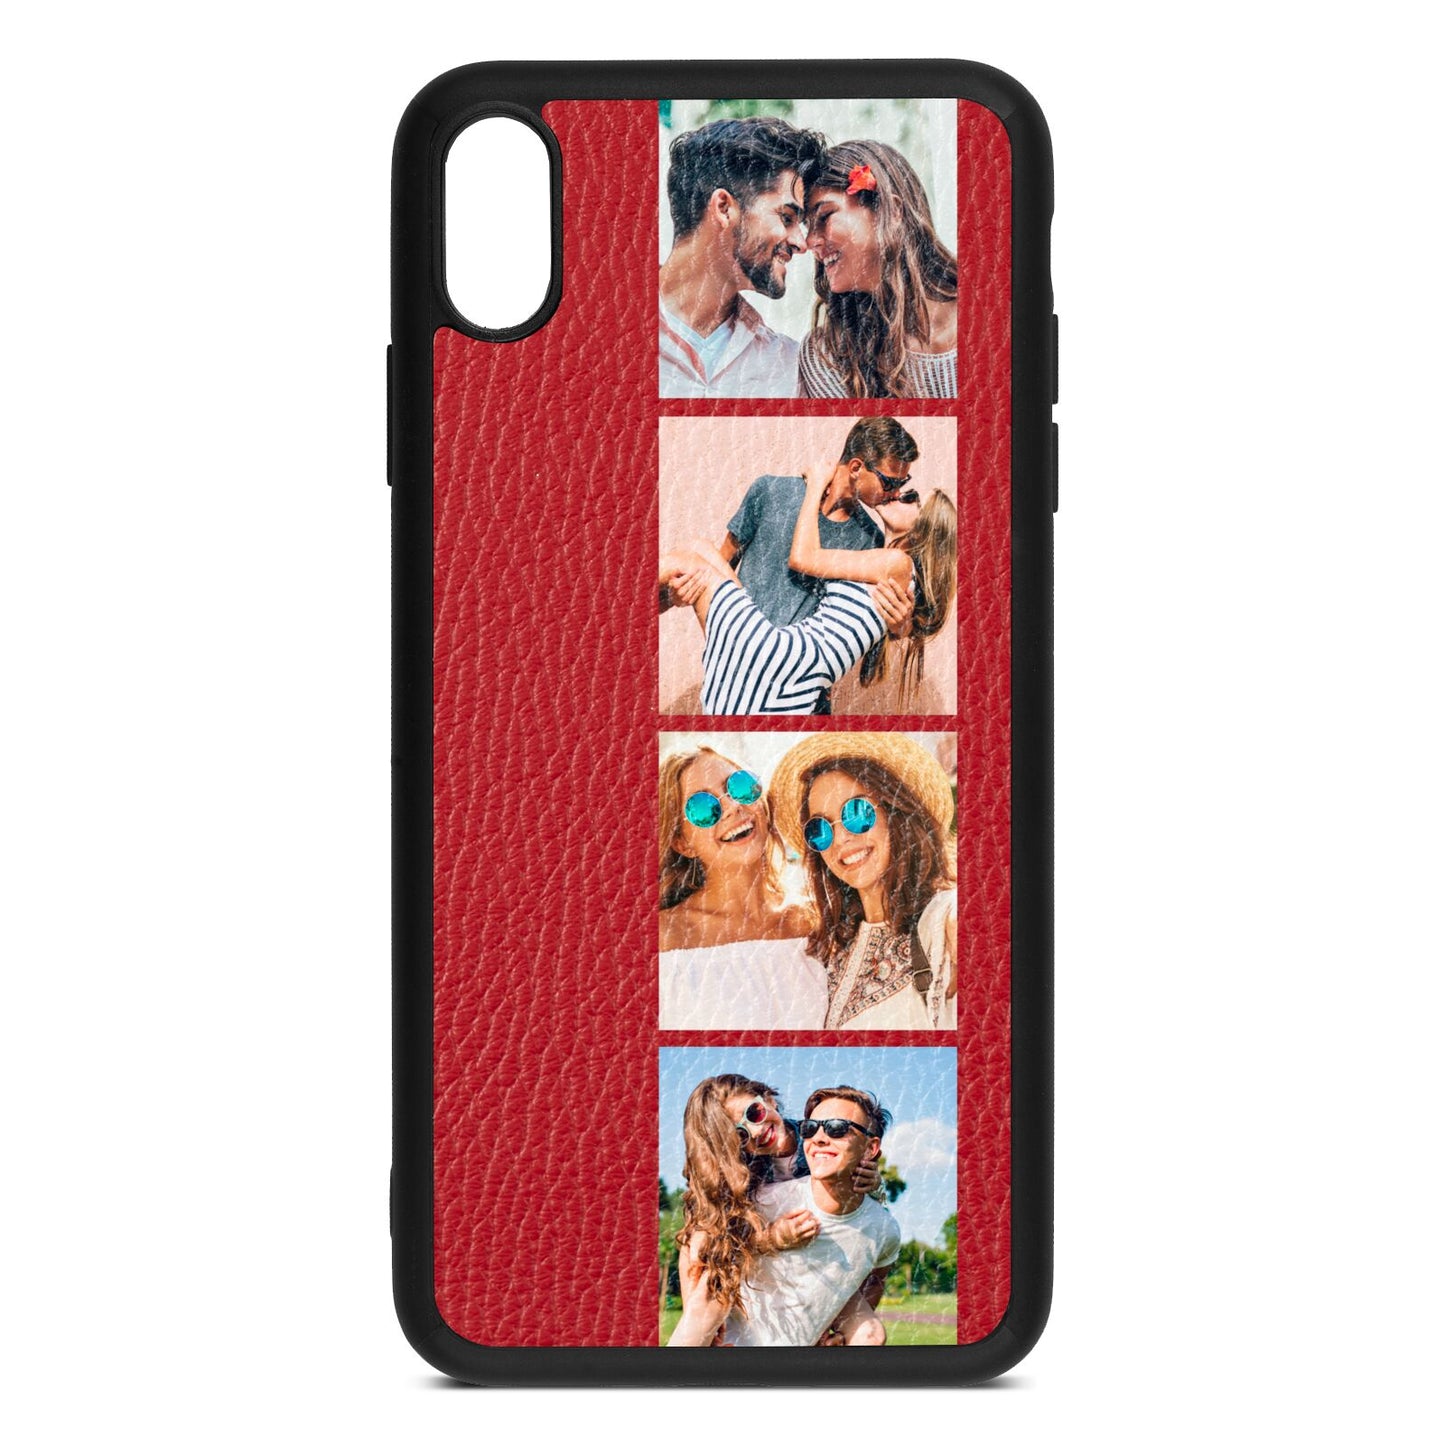 Photo Strip Montage Upload Red Pebble Leather iPhone Xs Max Case